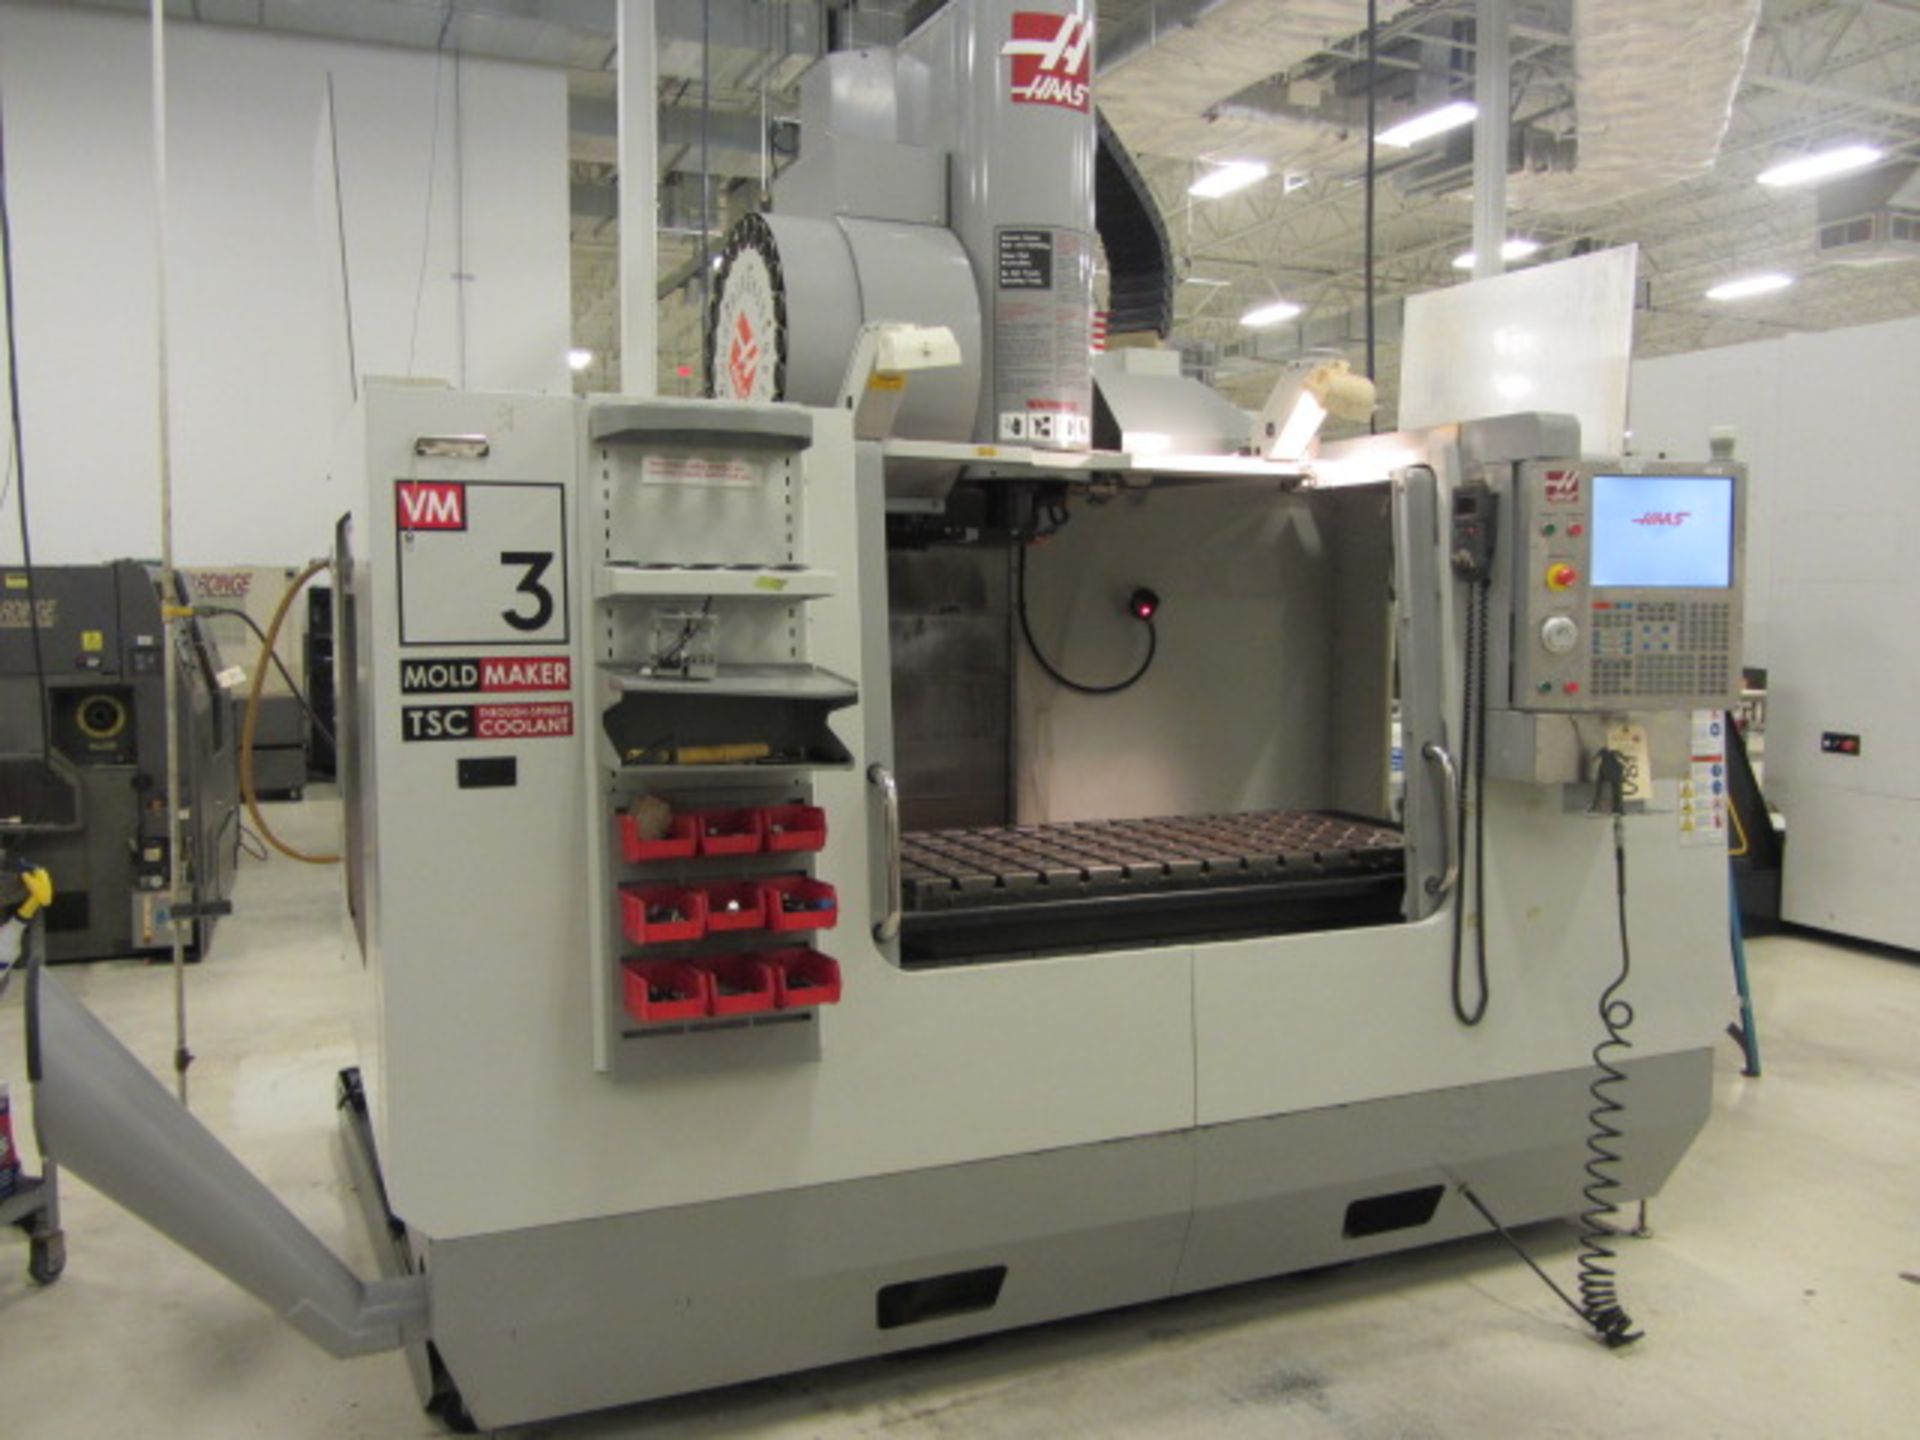 Haas VM-3 Mold Maker CNC Vertical Machining Center with 54'' x 24'' Table, #40 Taper Spindle - Bild 2 aus 10